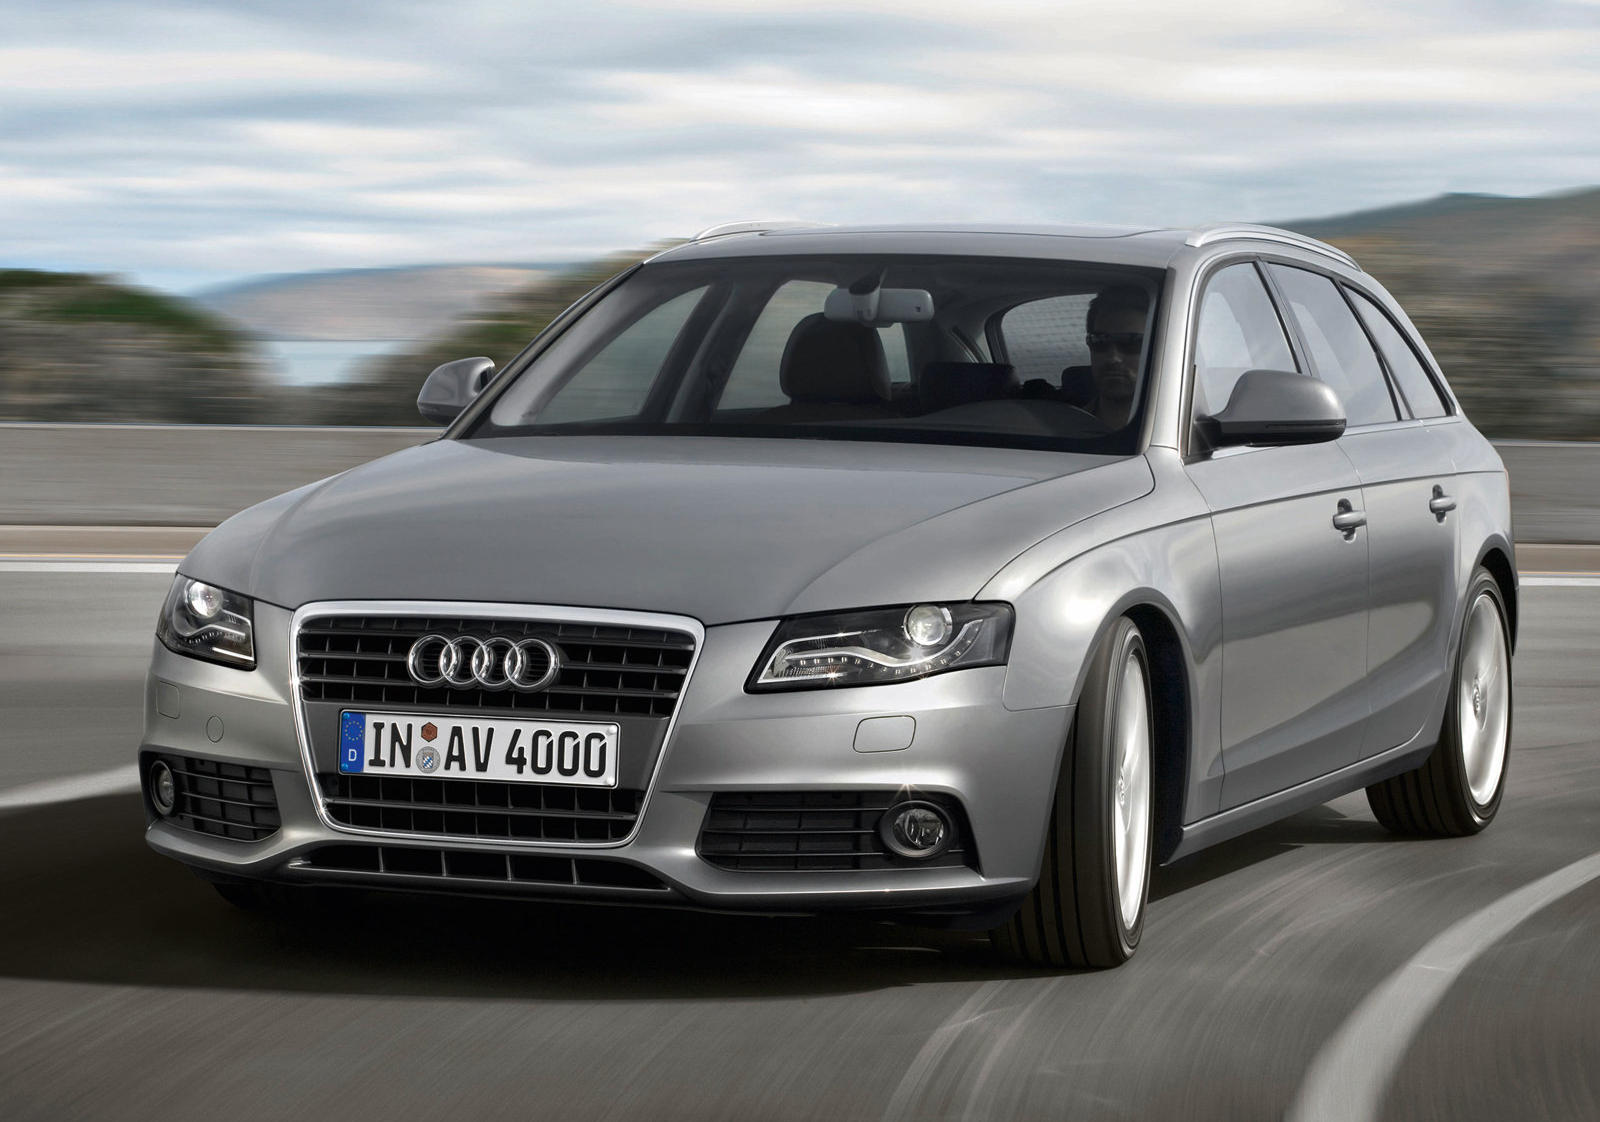 2010 Audi A4 Avant: Review, Specs, Price, New Interior Features, Exterior Design, Specifications |